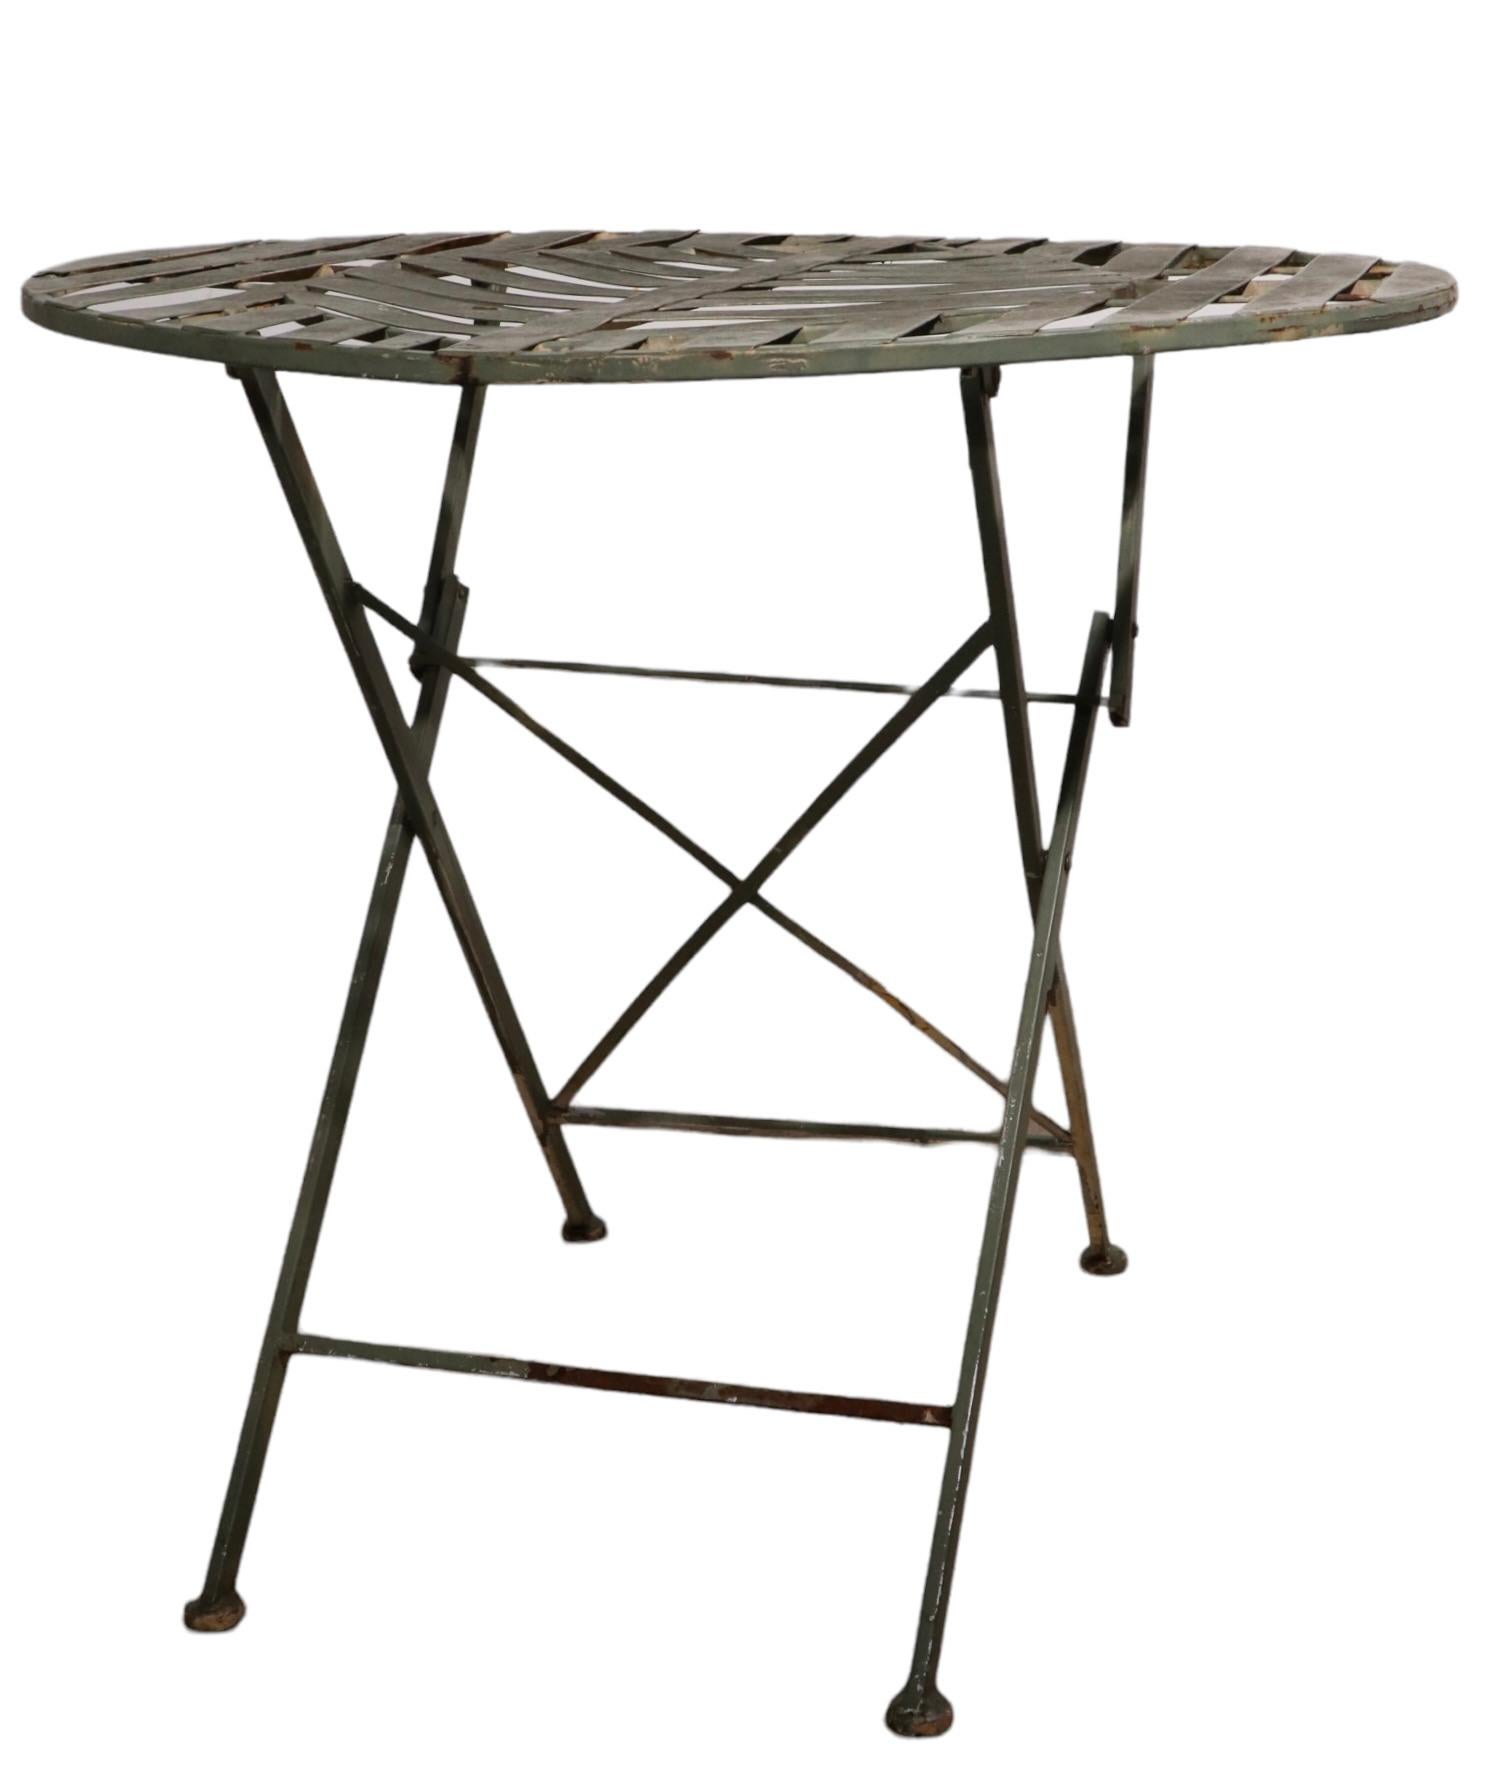 Chic folding cafe dining, garden, patio table constructed of metal strips and square stock. The table features a stylized leaf top, it folds up for easy transport and storage. Perfect diminutive scale, sophisticated design, functional, clean and